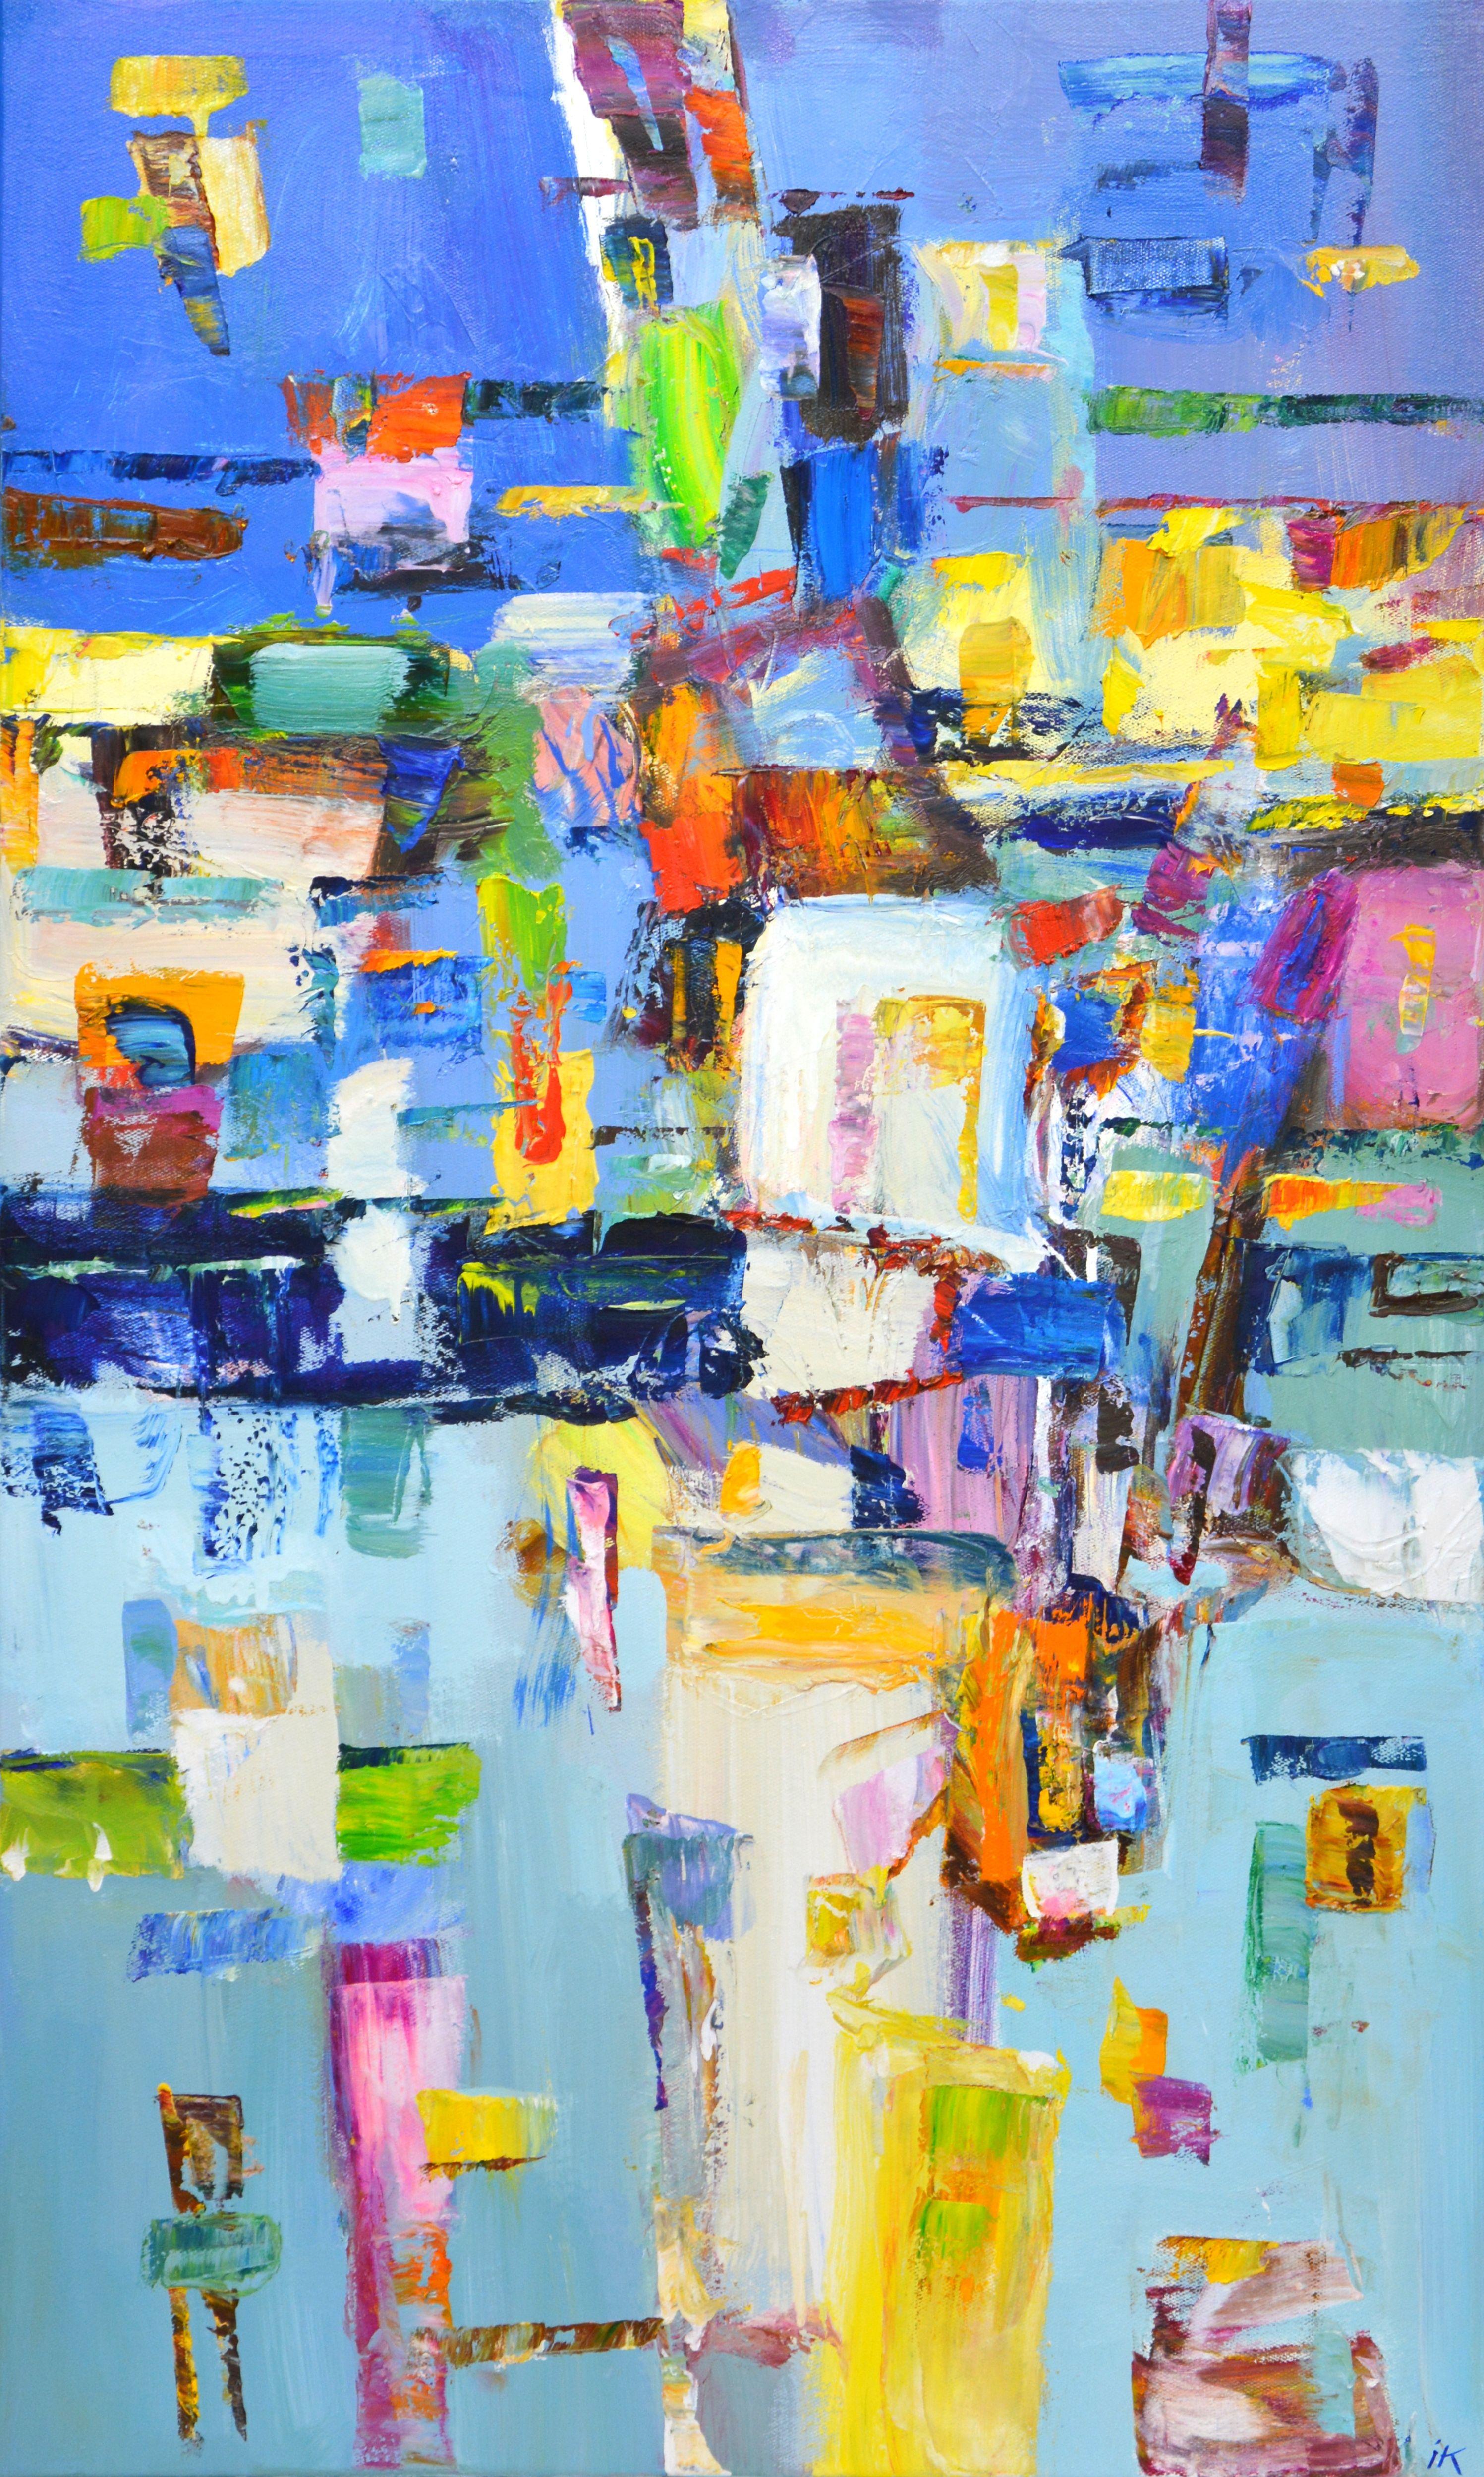 Evening in the city. This abstract composition is full of energy and excitement. Colors overlap and overlap, and contrast with subtle and vibrant color shifts. Accents of bright yellow, white, red look modern and effective against a blue background.